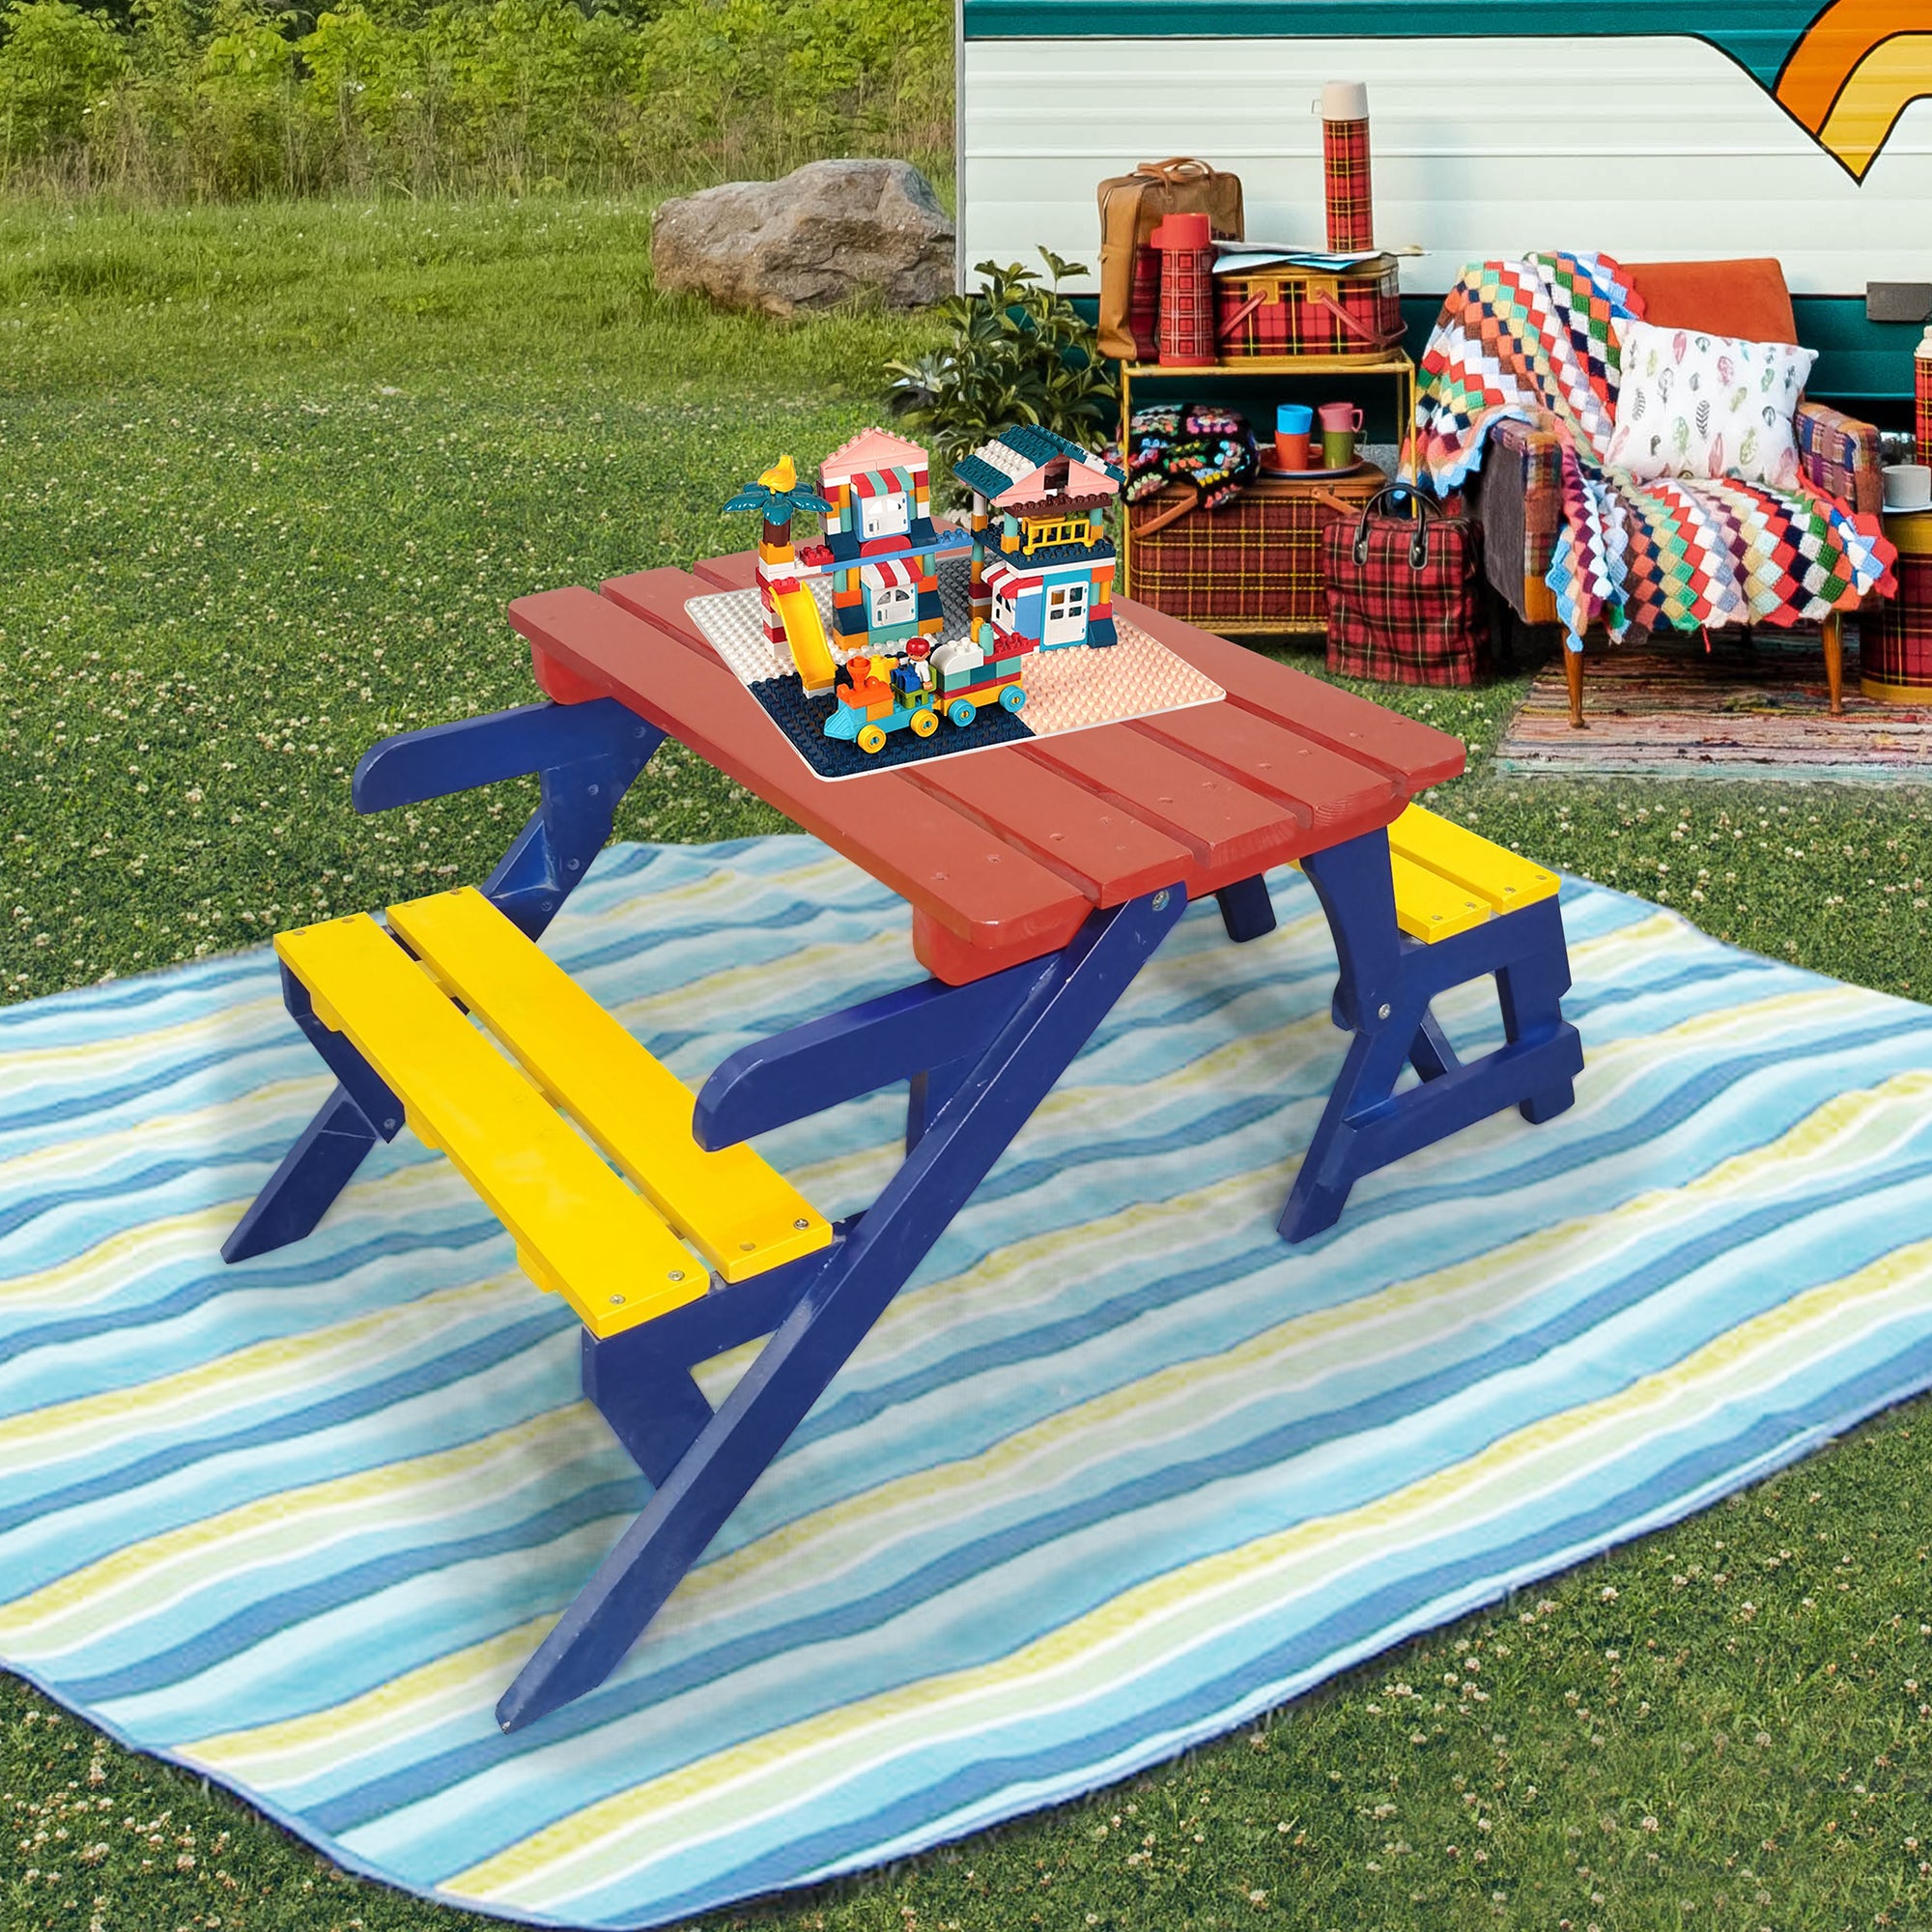 KID'S MULTI-FUNCTIONAL  ARM CHAIR,  TABLE+ 2 BENCHES（All-in-one）